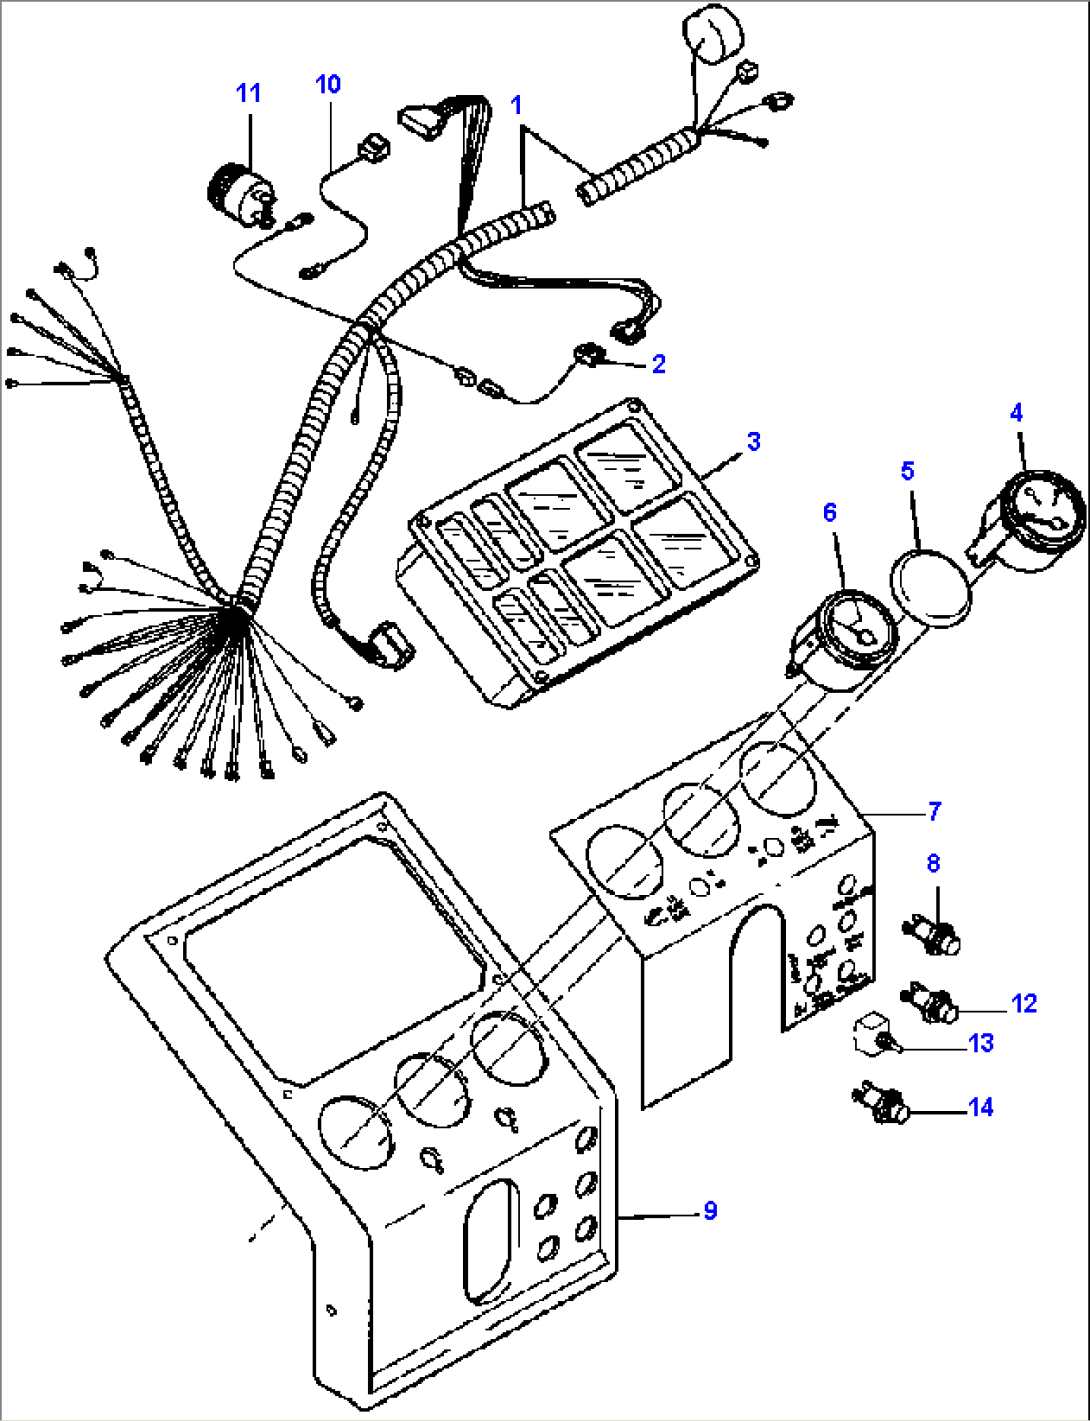 STEERING CONSOLE INSTRUMENT PANEL